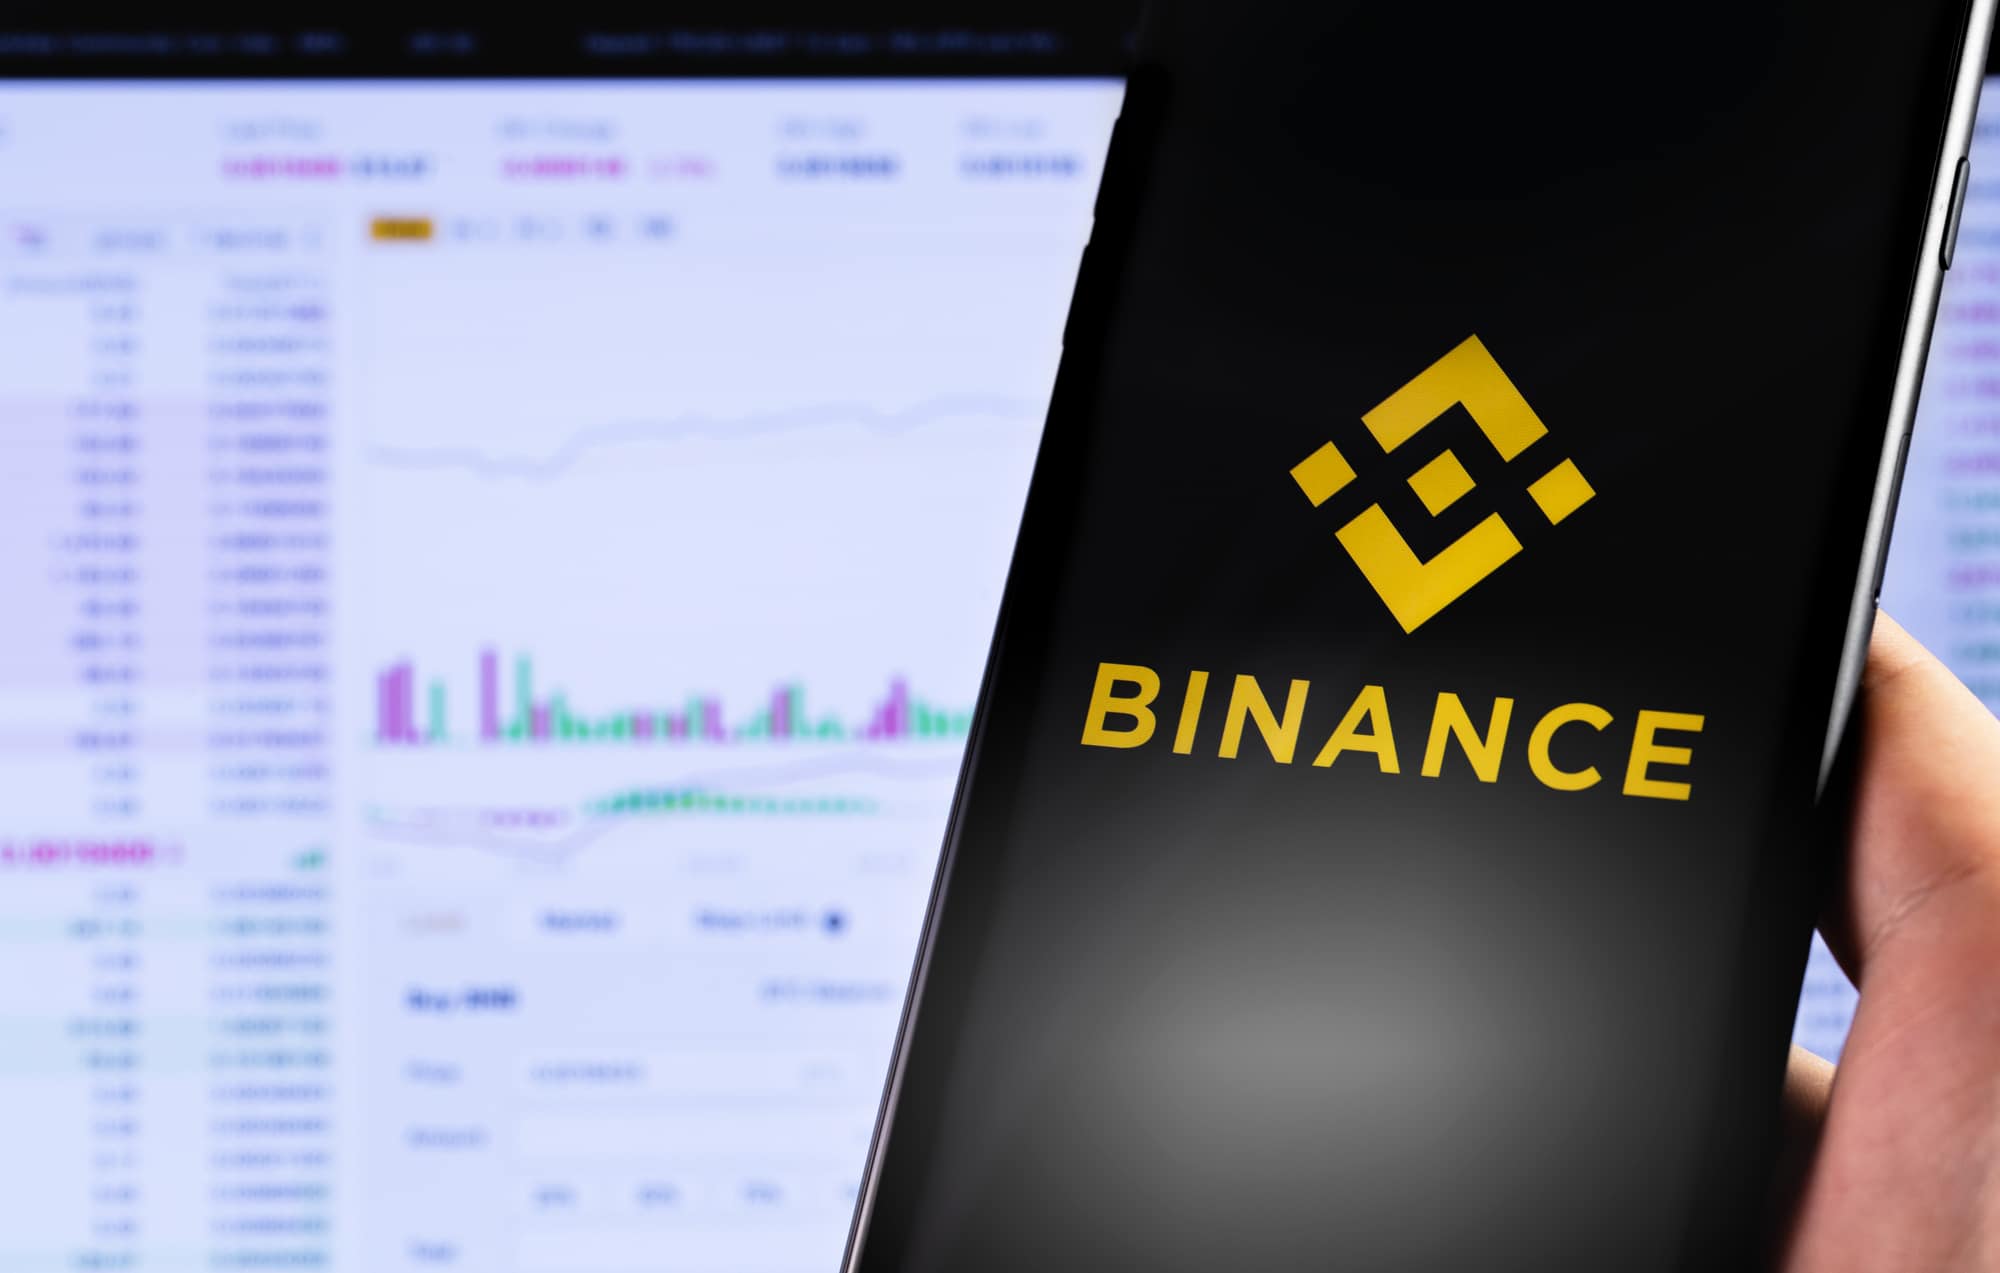 Binance logo on the screen smartphone and display notebook closeup. Binance - one of the largest cryptocurrency exchange on the market. Moscow, Russia - May 20, 2019